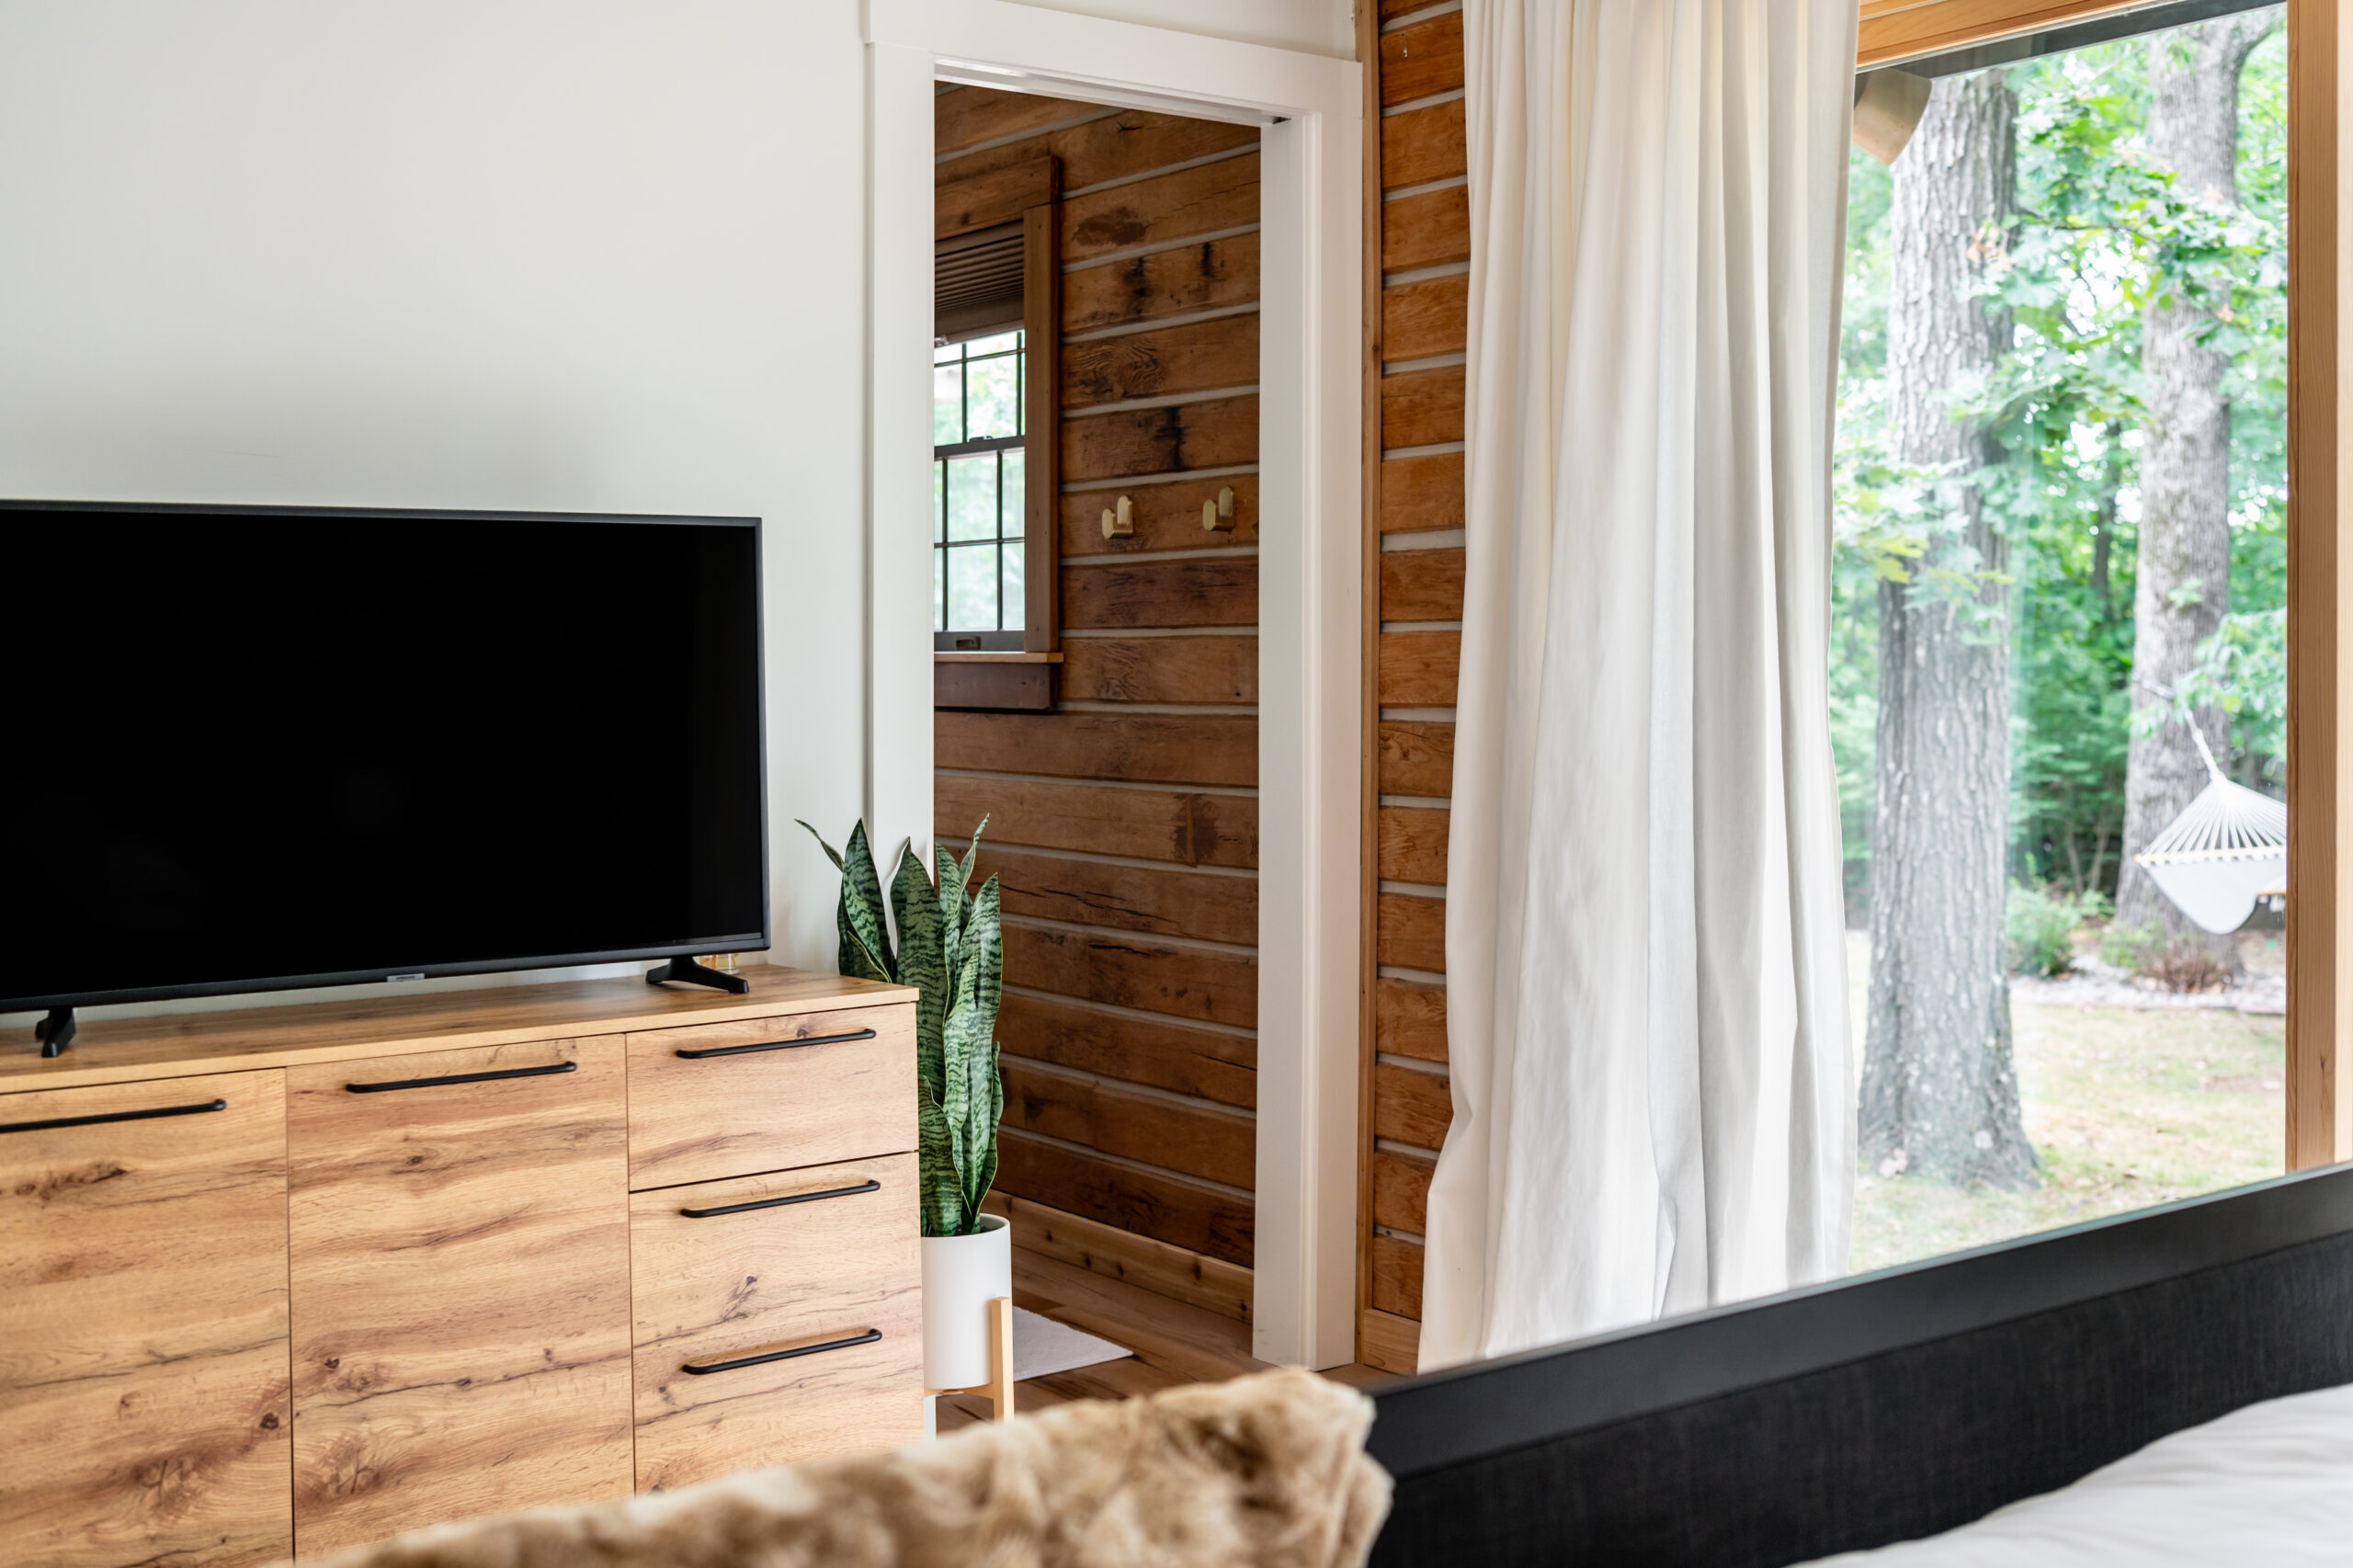 Interior Design Photoshoot for a rustic log cabin